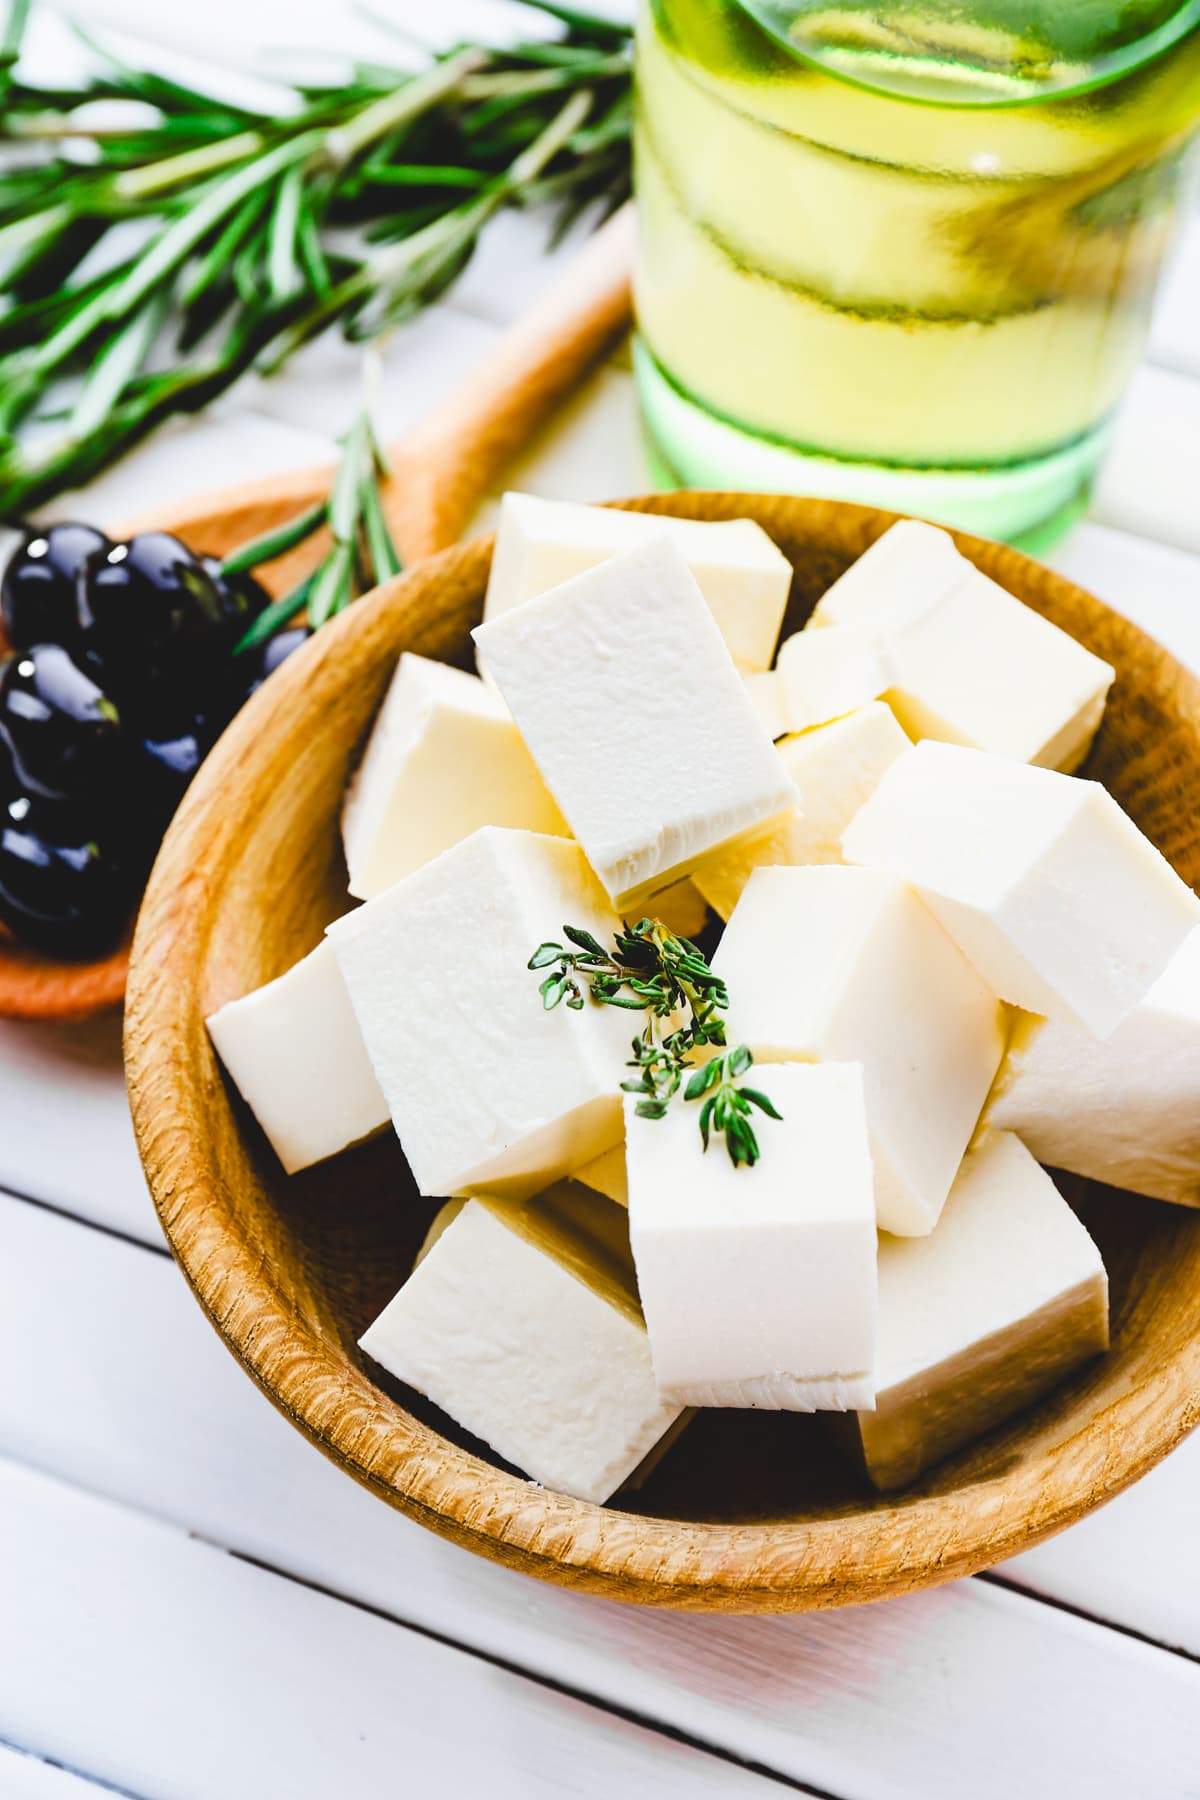 Feta cheese cubes in a brown wooden bowl, with a rosemary sprig, olive oil, and olives set behind the bowl.